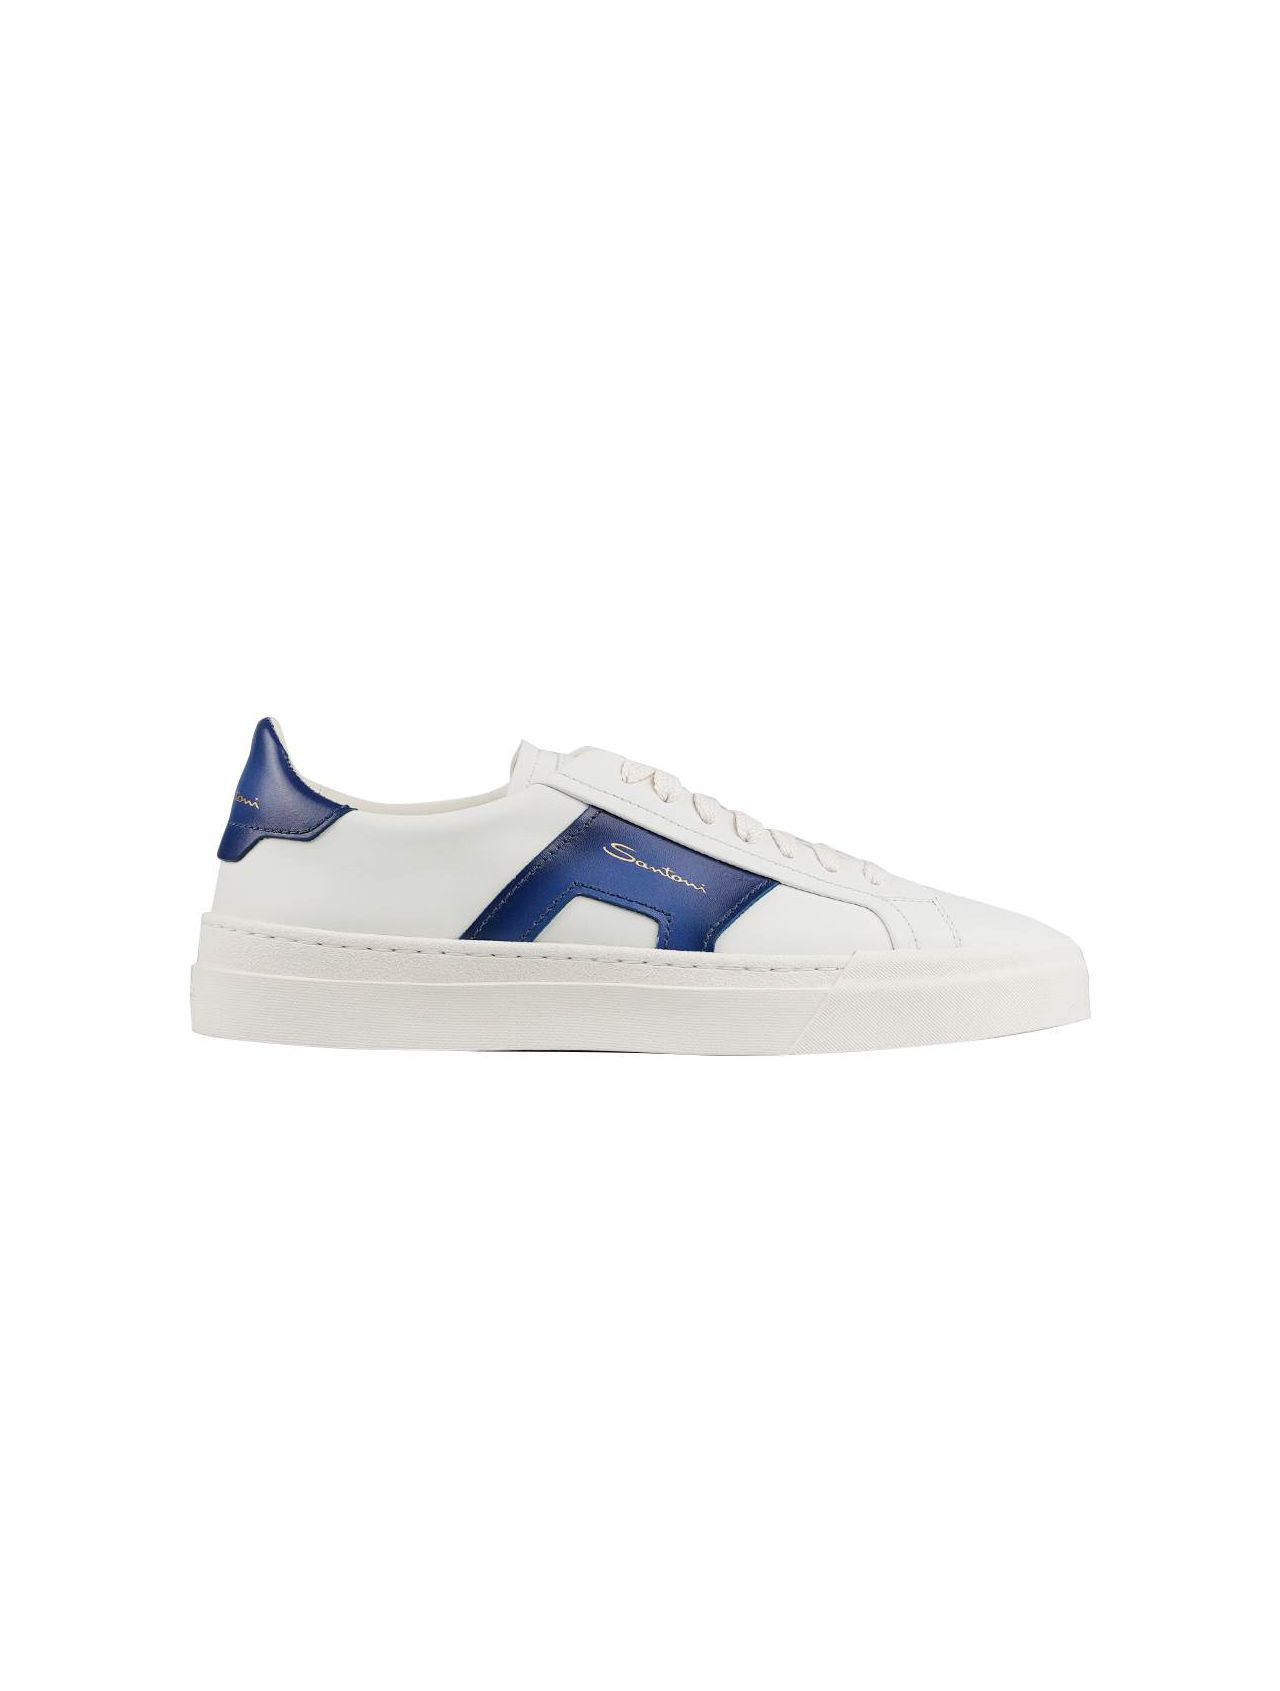 Discover 286+ blue leather sneakers best